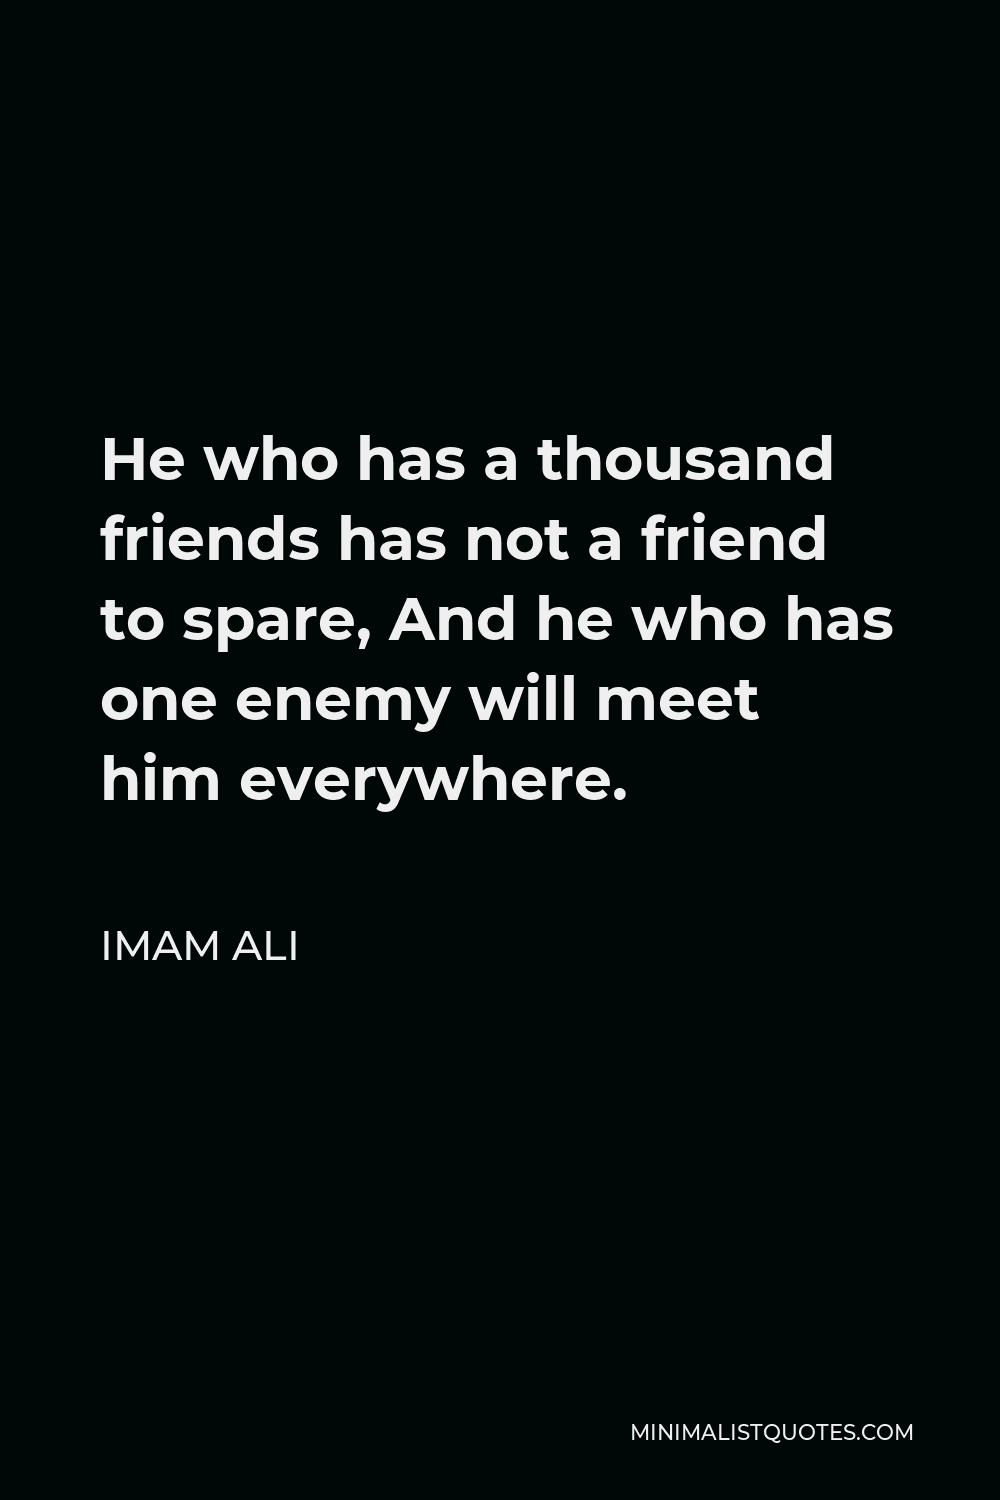 Imam Ali Quote - He who has a thousand friends has not a friend to spare, And he who has one enemy will meet him everywhere.